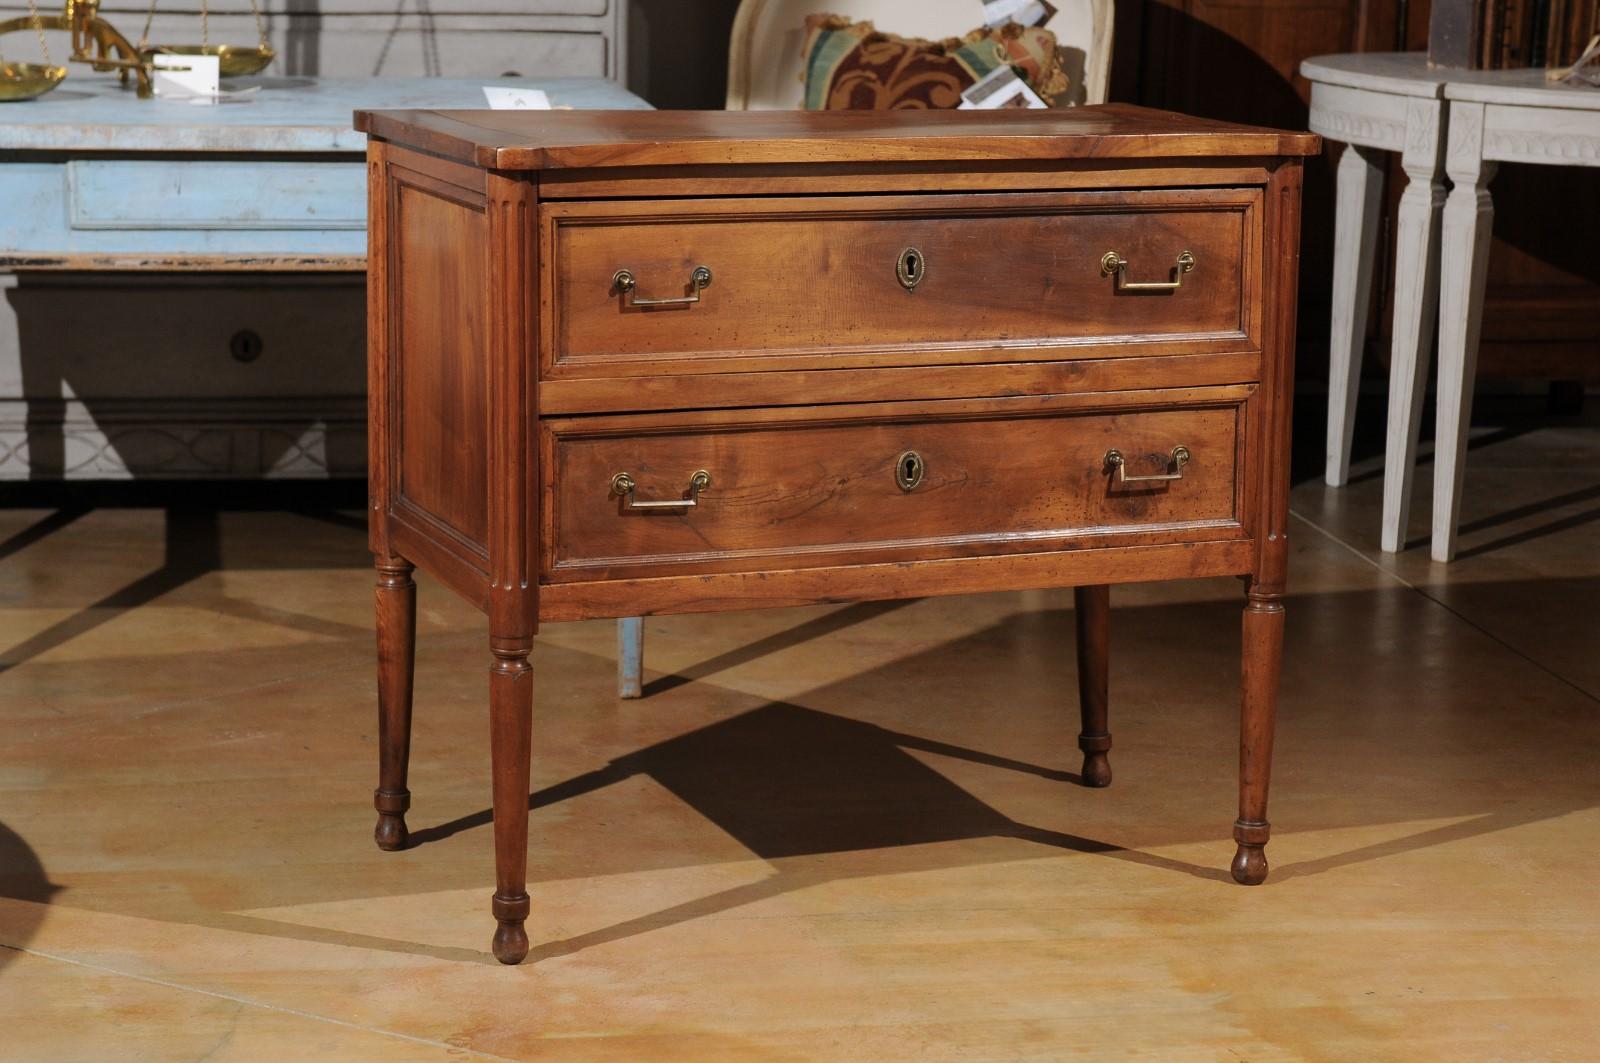 A petite French Louis XVI period walnut commode from the late 18th century, with two drawers and fluted accents. Born in France during the reign of King Louis XVI, this exquisite petite commode features a rectangular top with rounded corners,